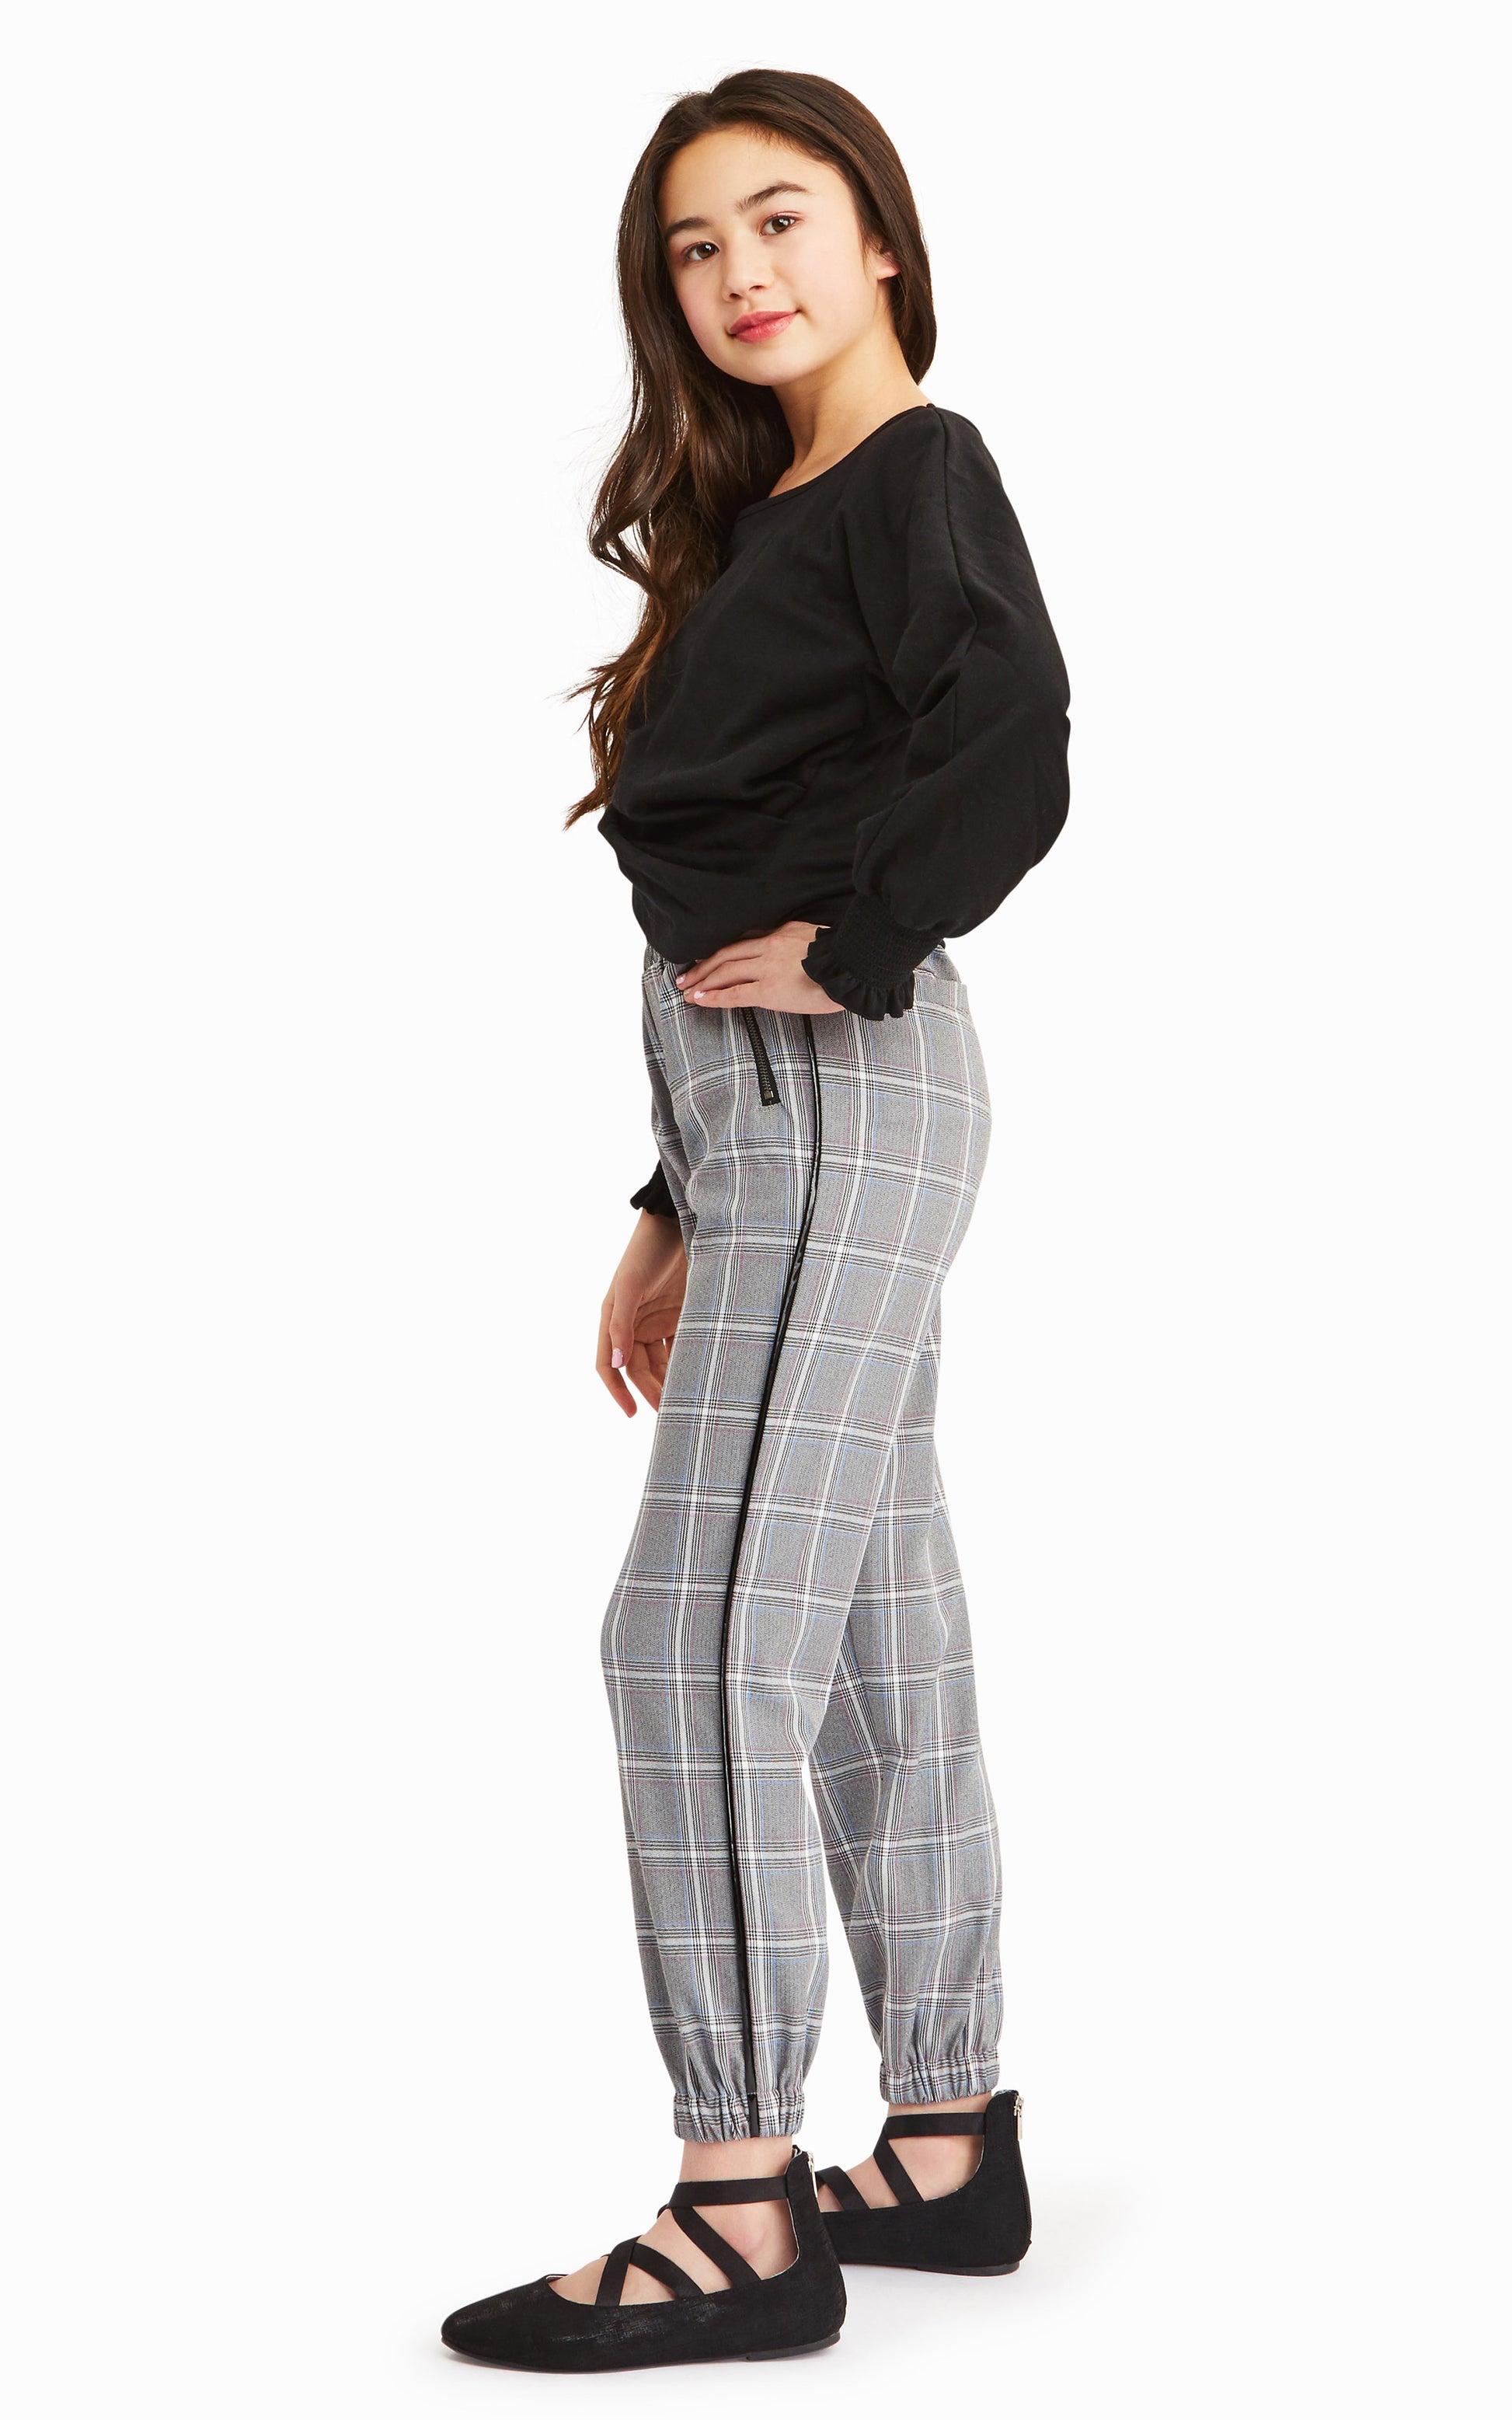 Side view of girl wearing long-sleeve black top with gray, white and black check pattern joggers.